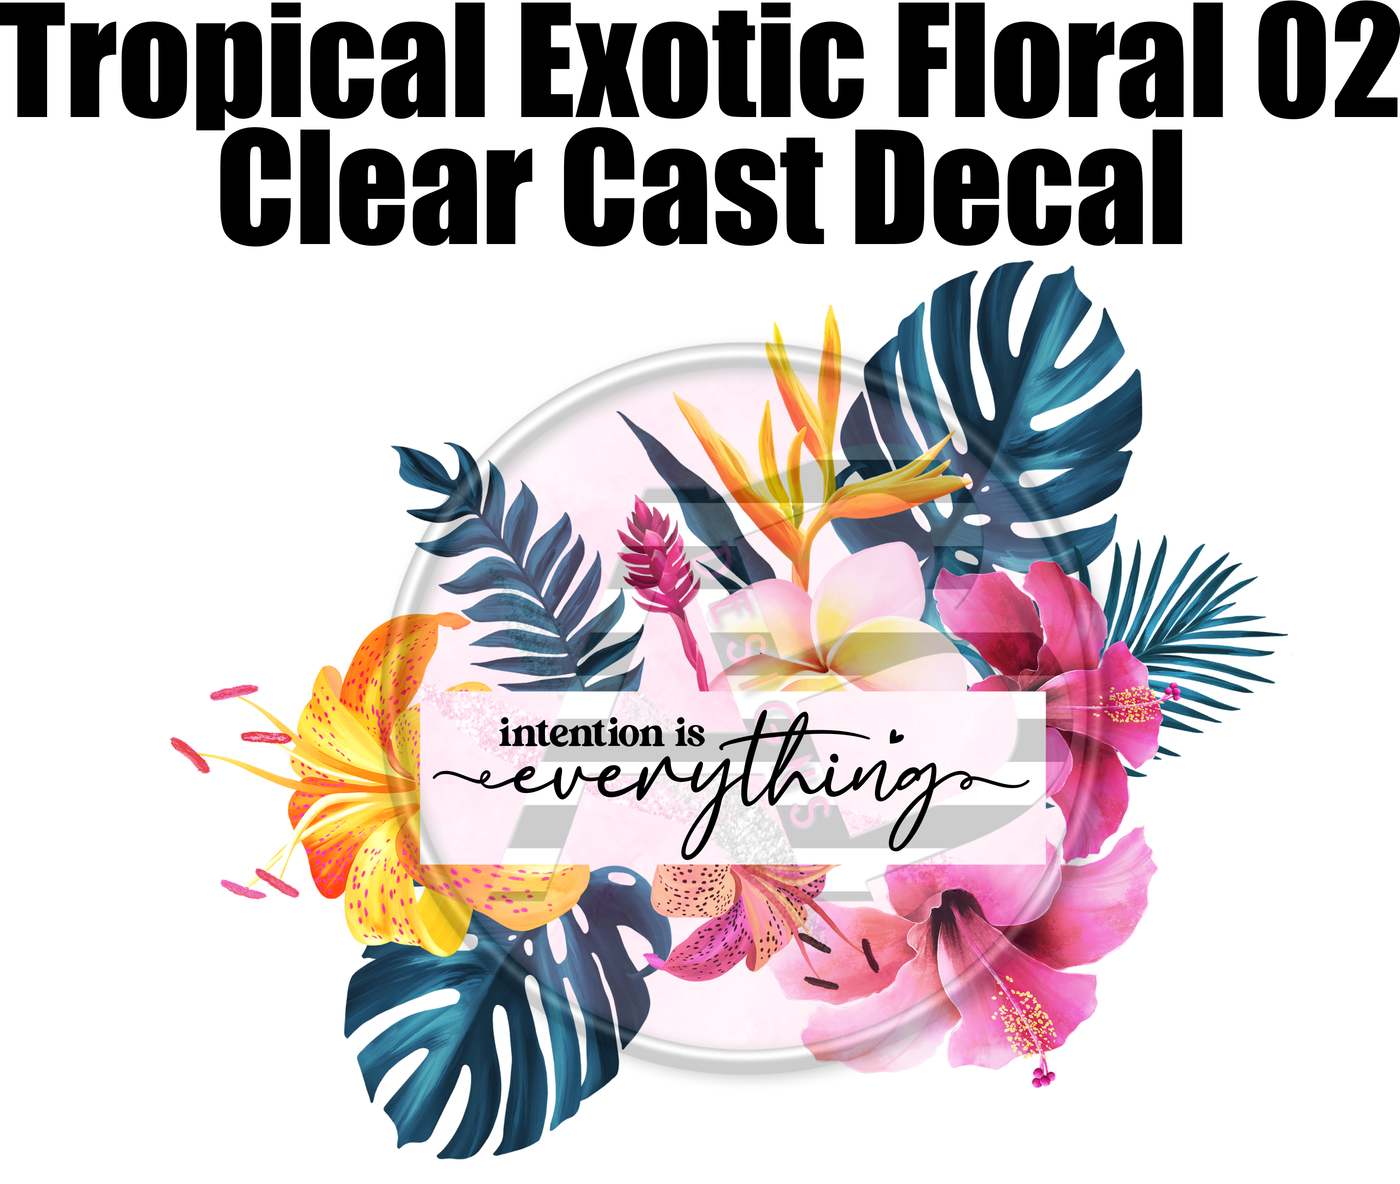 Tropical Exotic Floral 02 - Clear Cast Decal